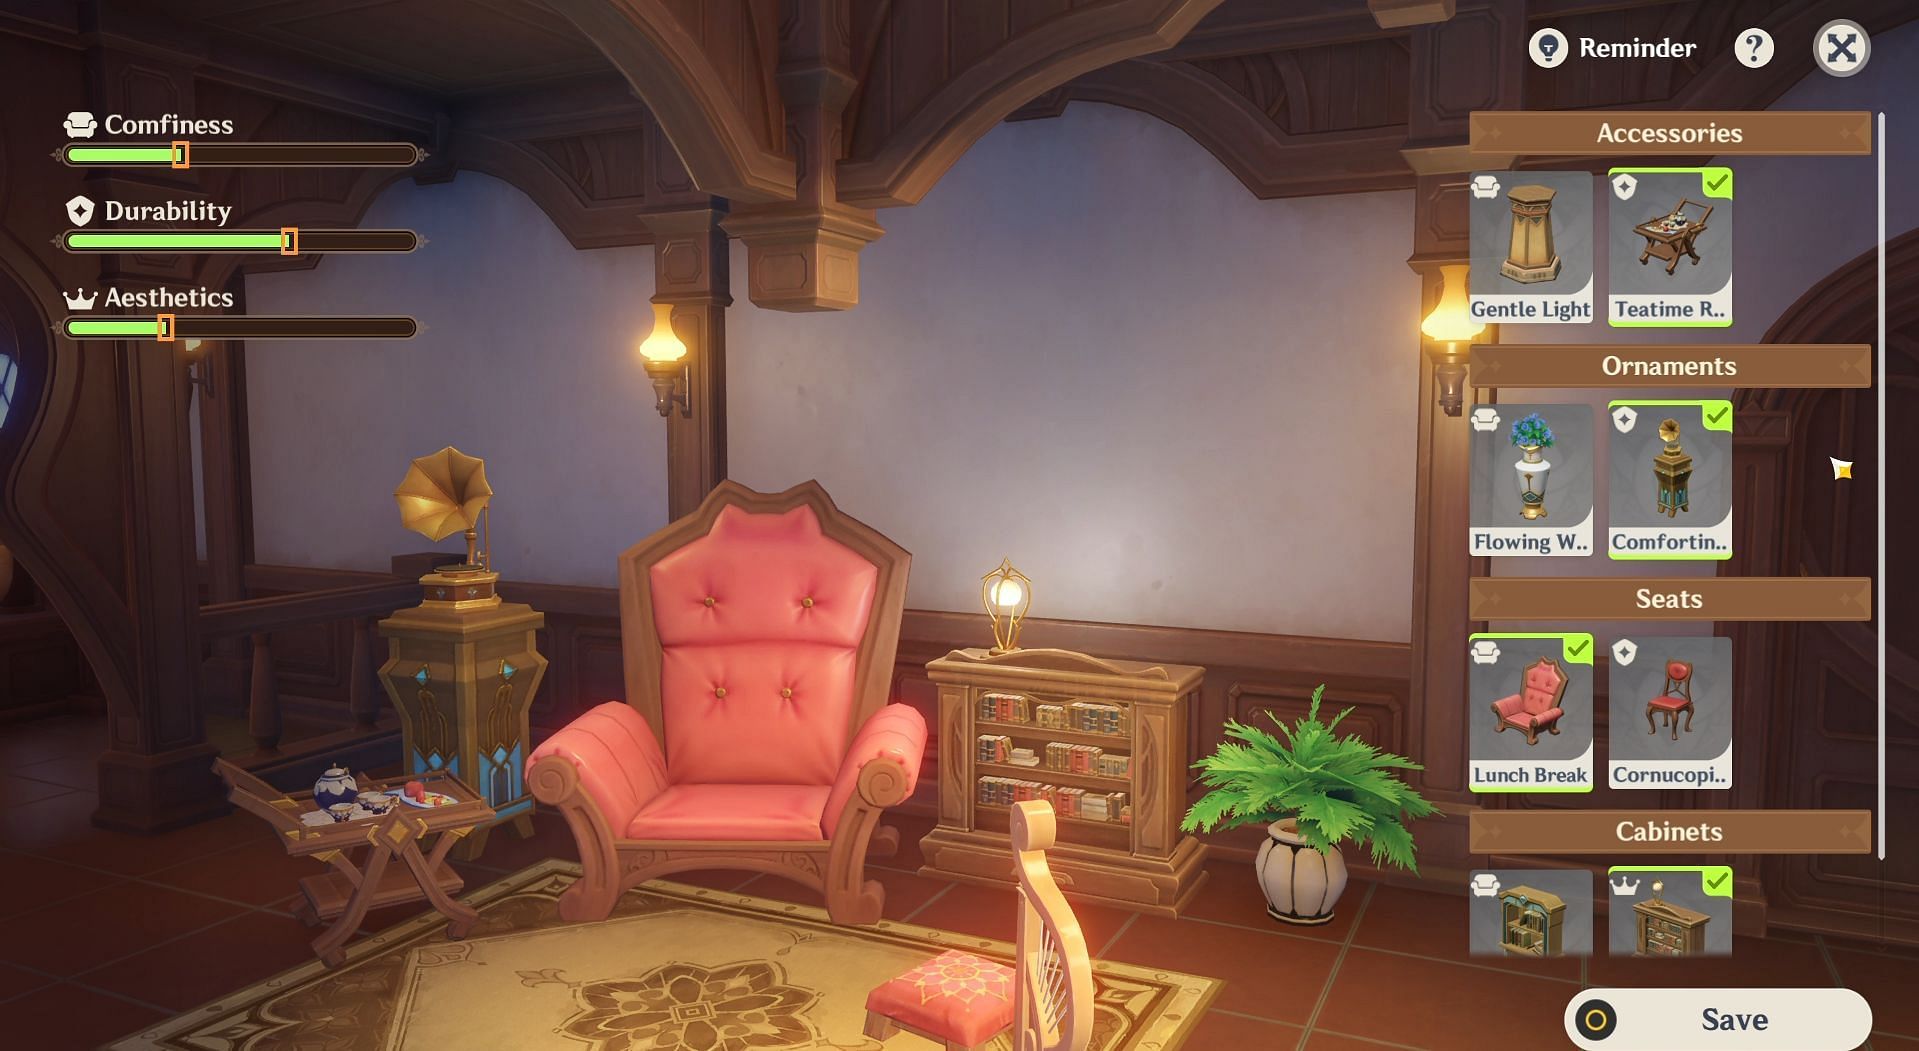 Place the furnishings according to the attribute requirements. (Image via HoYoverse)